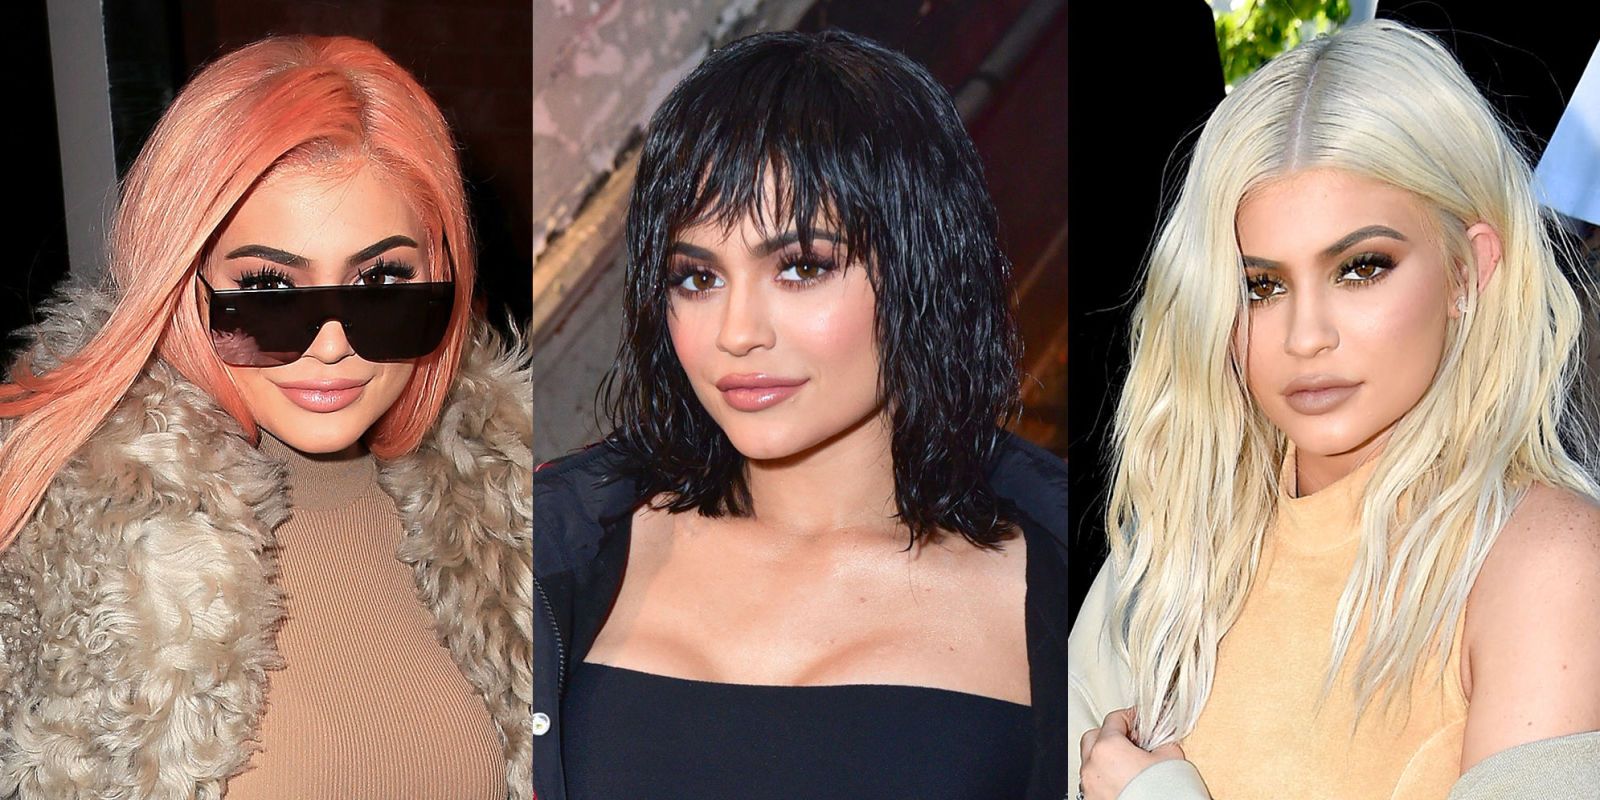 Kylie Jenner brings back pink hair in new pics